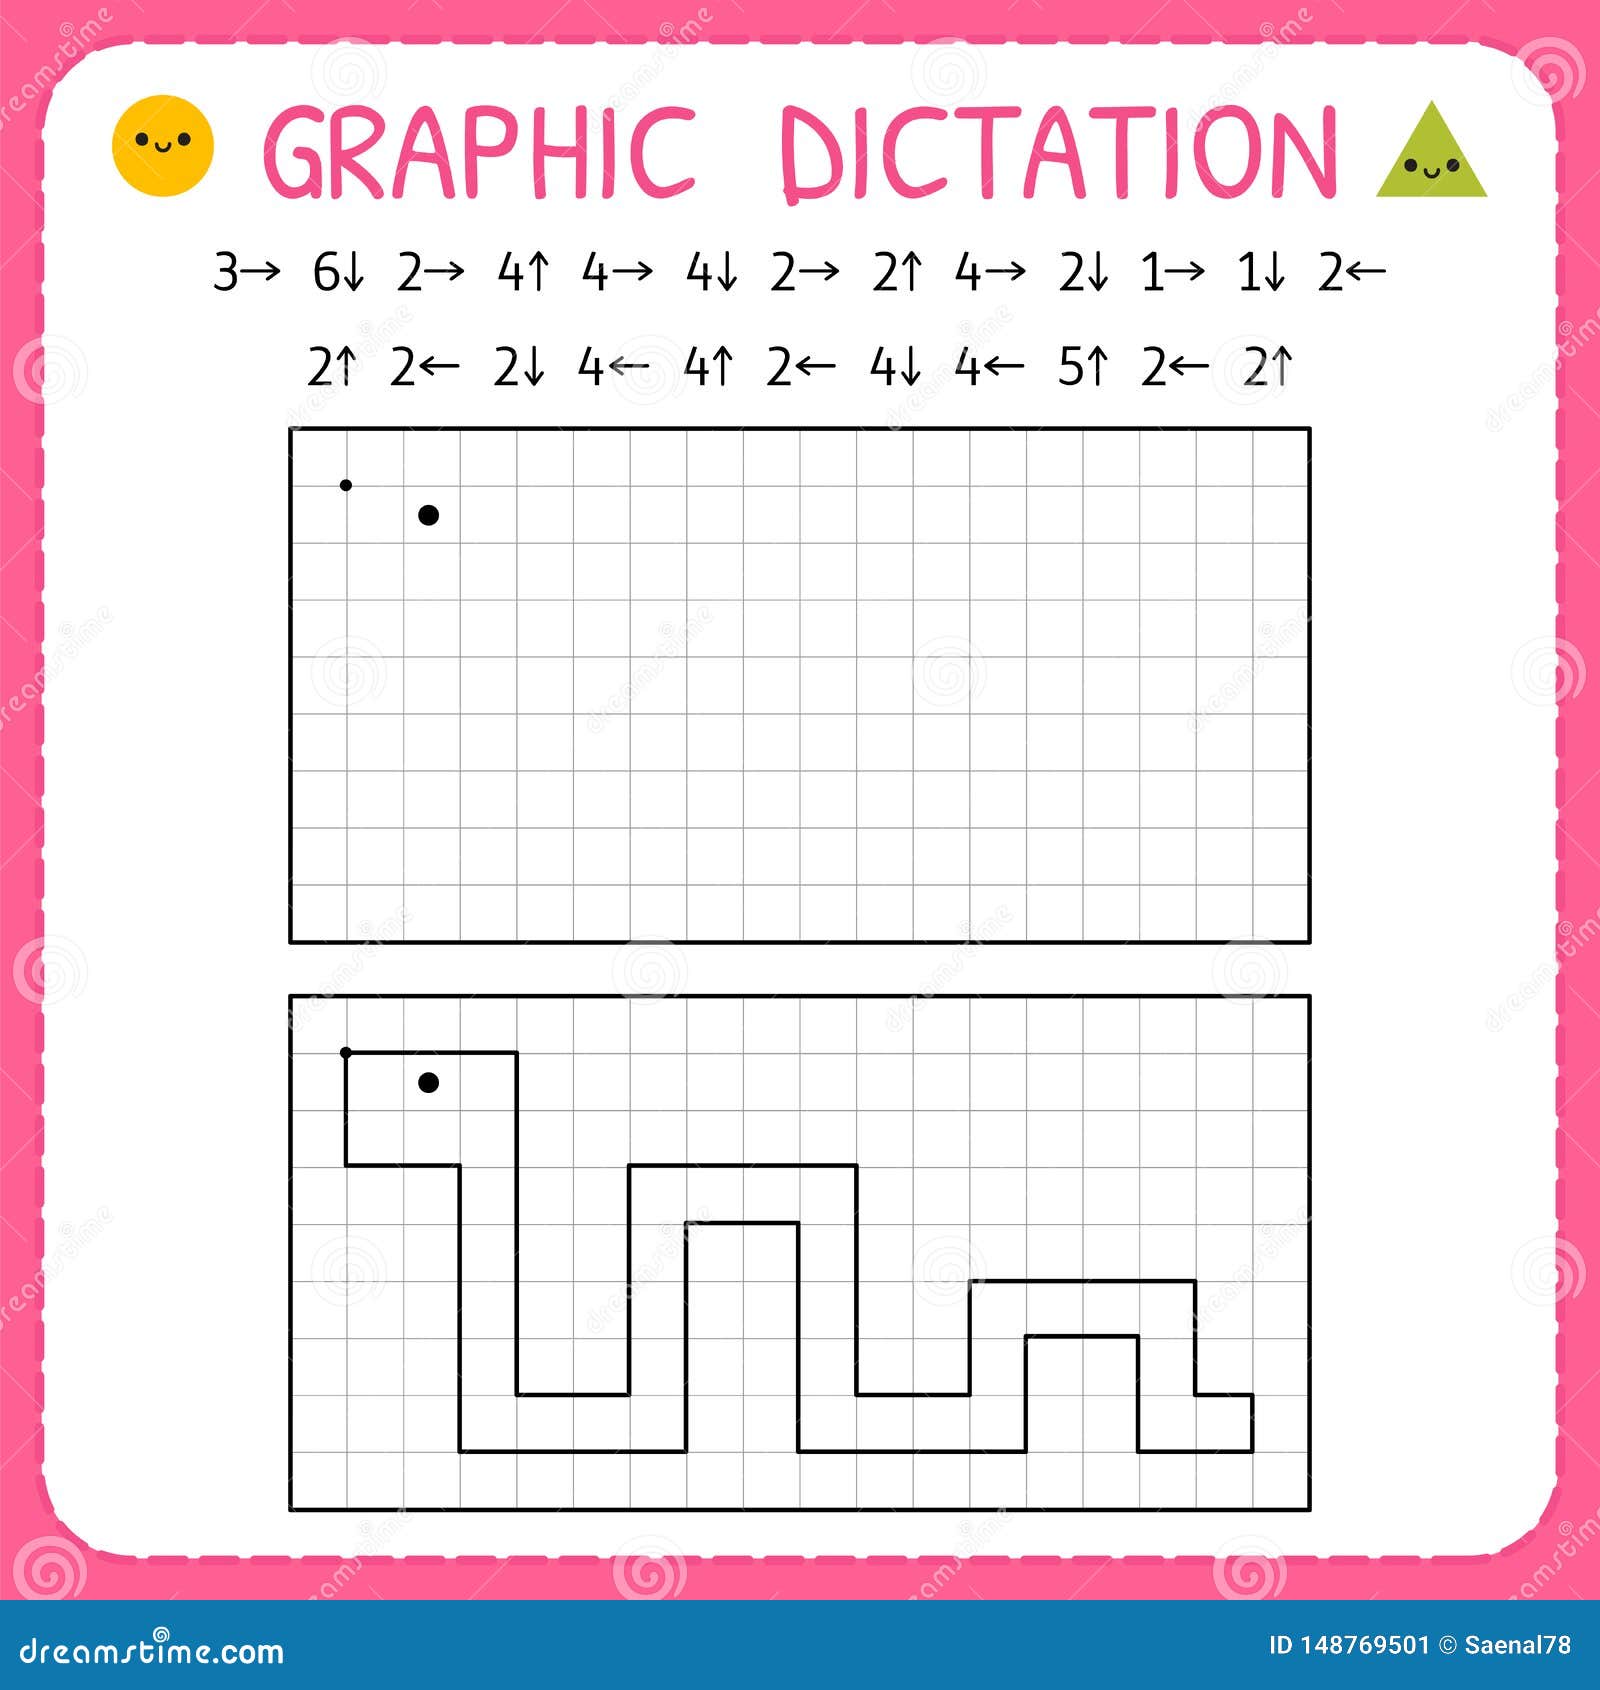 graphic dictation snake kindergarten educational game for kids preschool worksheet for practicing motor skills working pages stock vector illustration of knowledge education 148769501